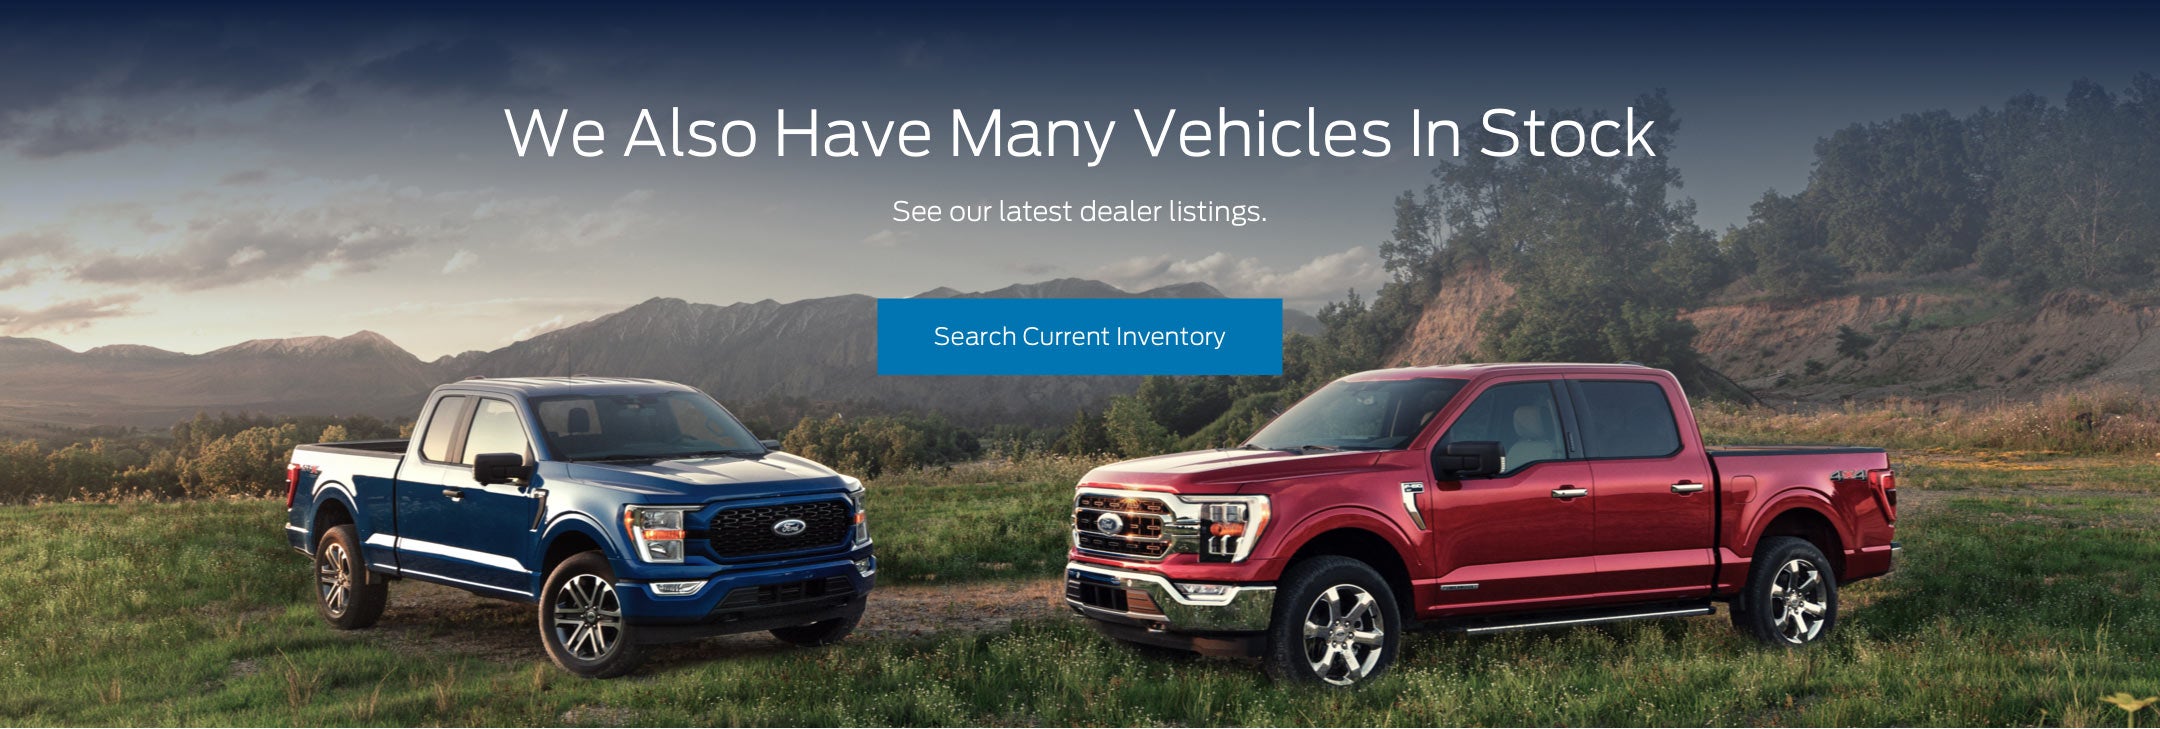 Ford vehicles in stock | Town & Country Ford in Port Arthur TX